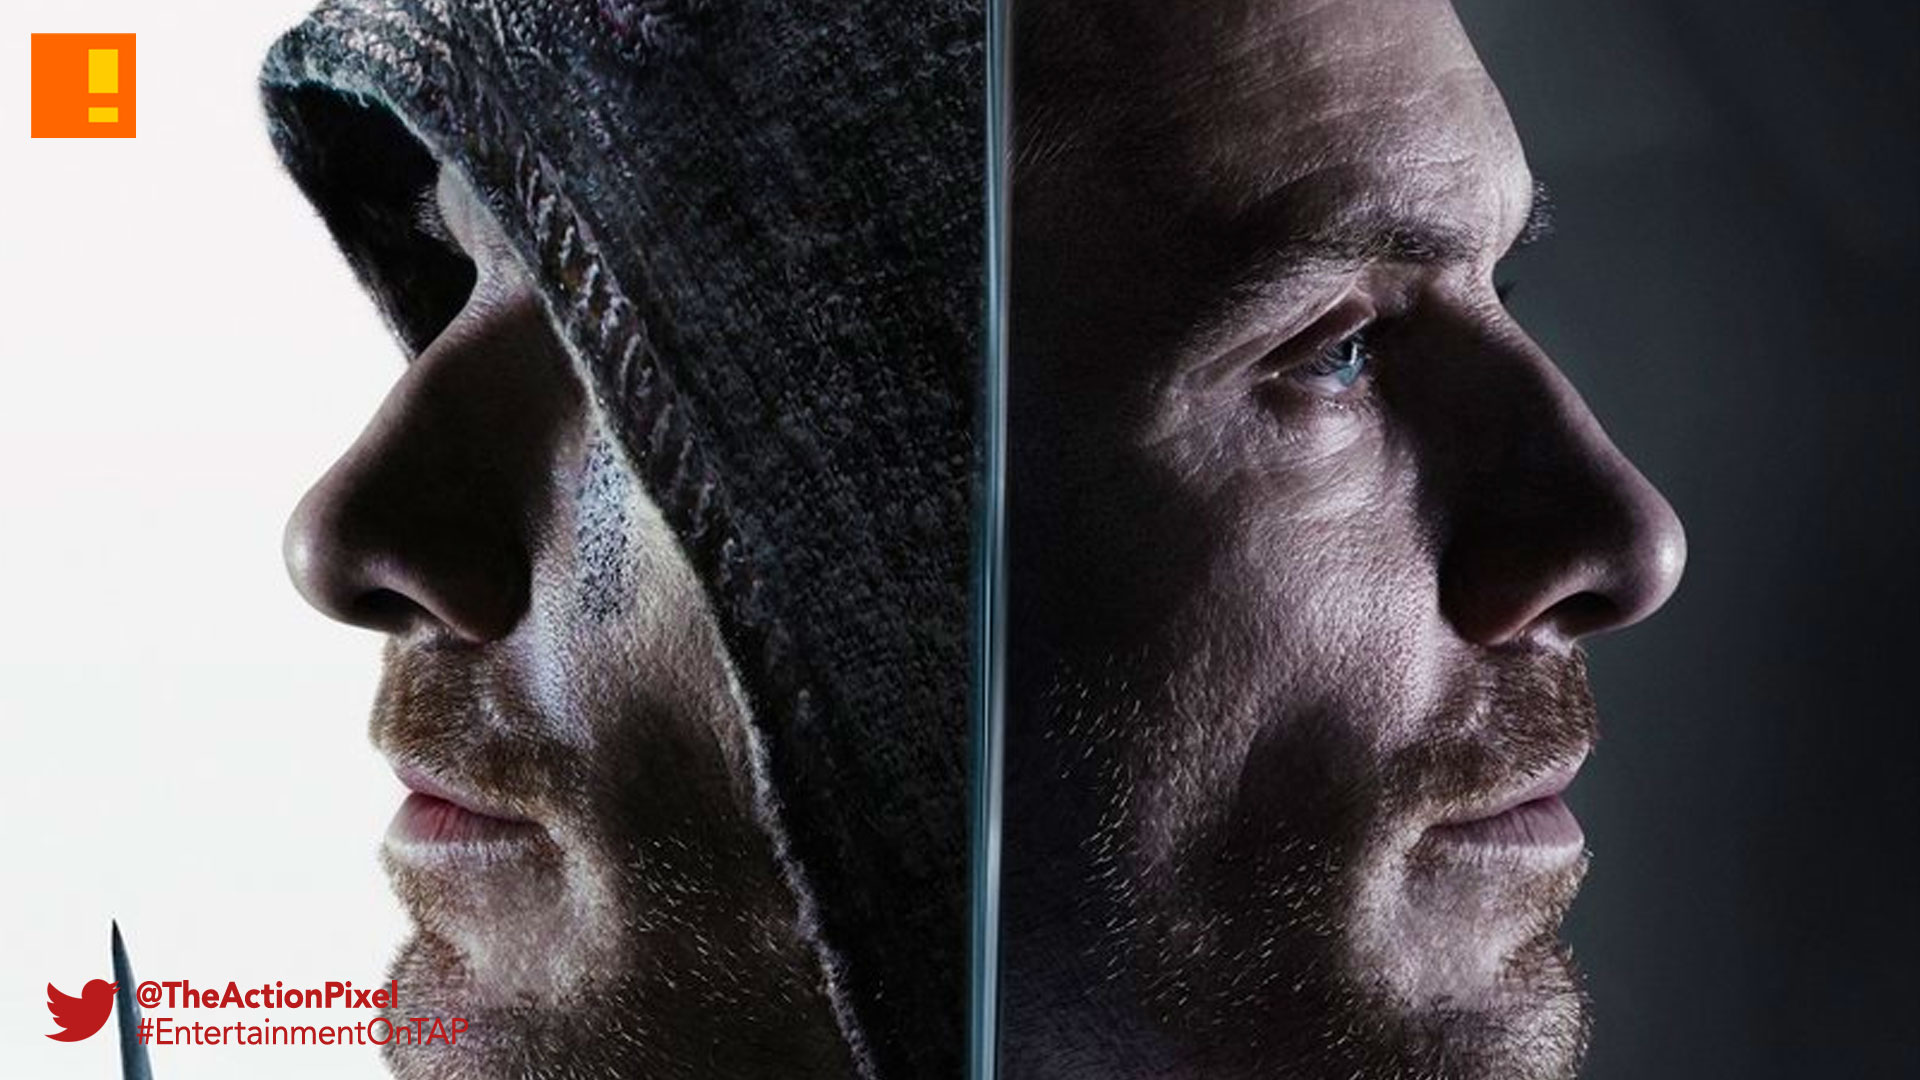 assassin's creed, poster, Callum lynch, entertainment on tap, new regency, the action pixel, ubisoft, 20th century fox, poster, michael fassbender,